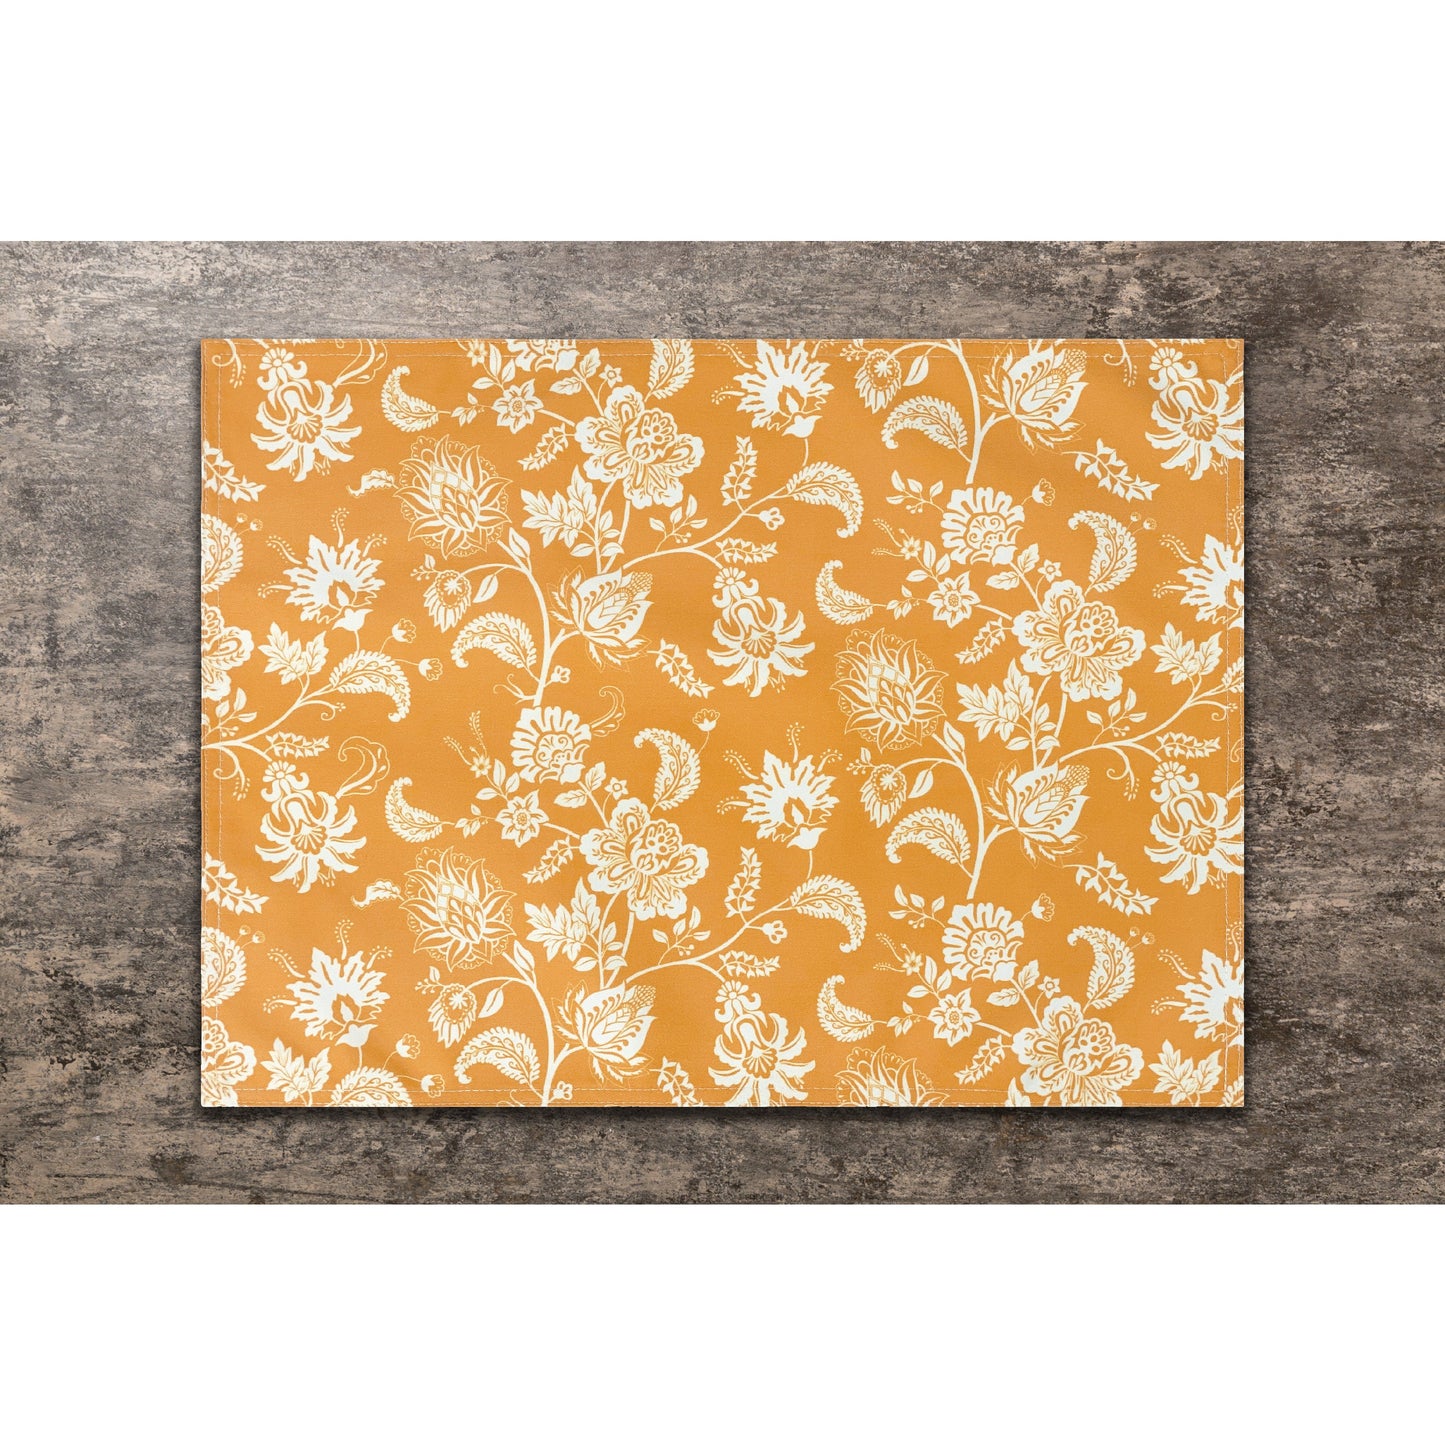 Set of 4 Yellow Vintage Climbing Flower Placemat, Fall floral printed placemat, 14" x 19", Washable Cotton Placemat for dining table